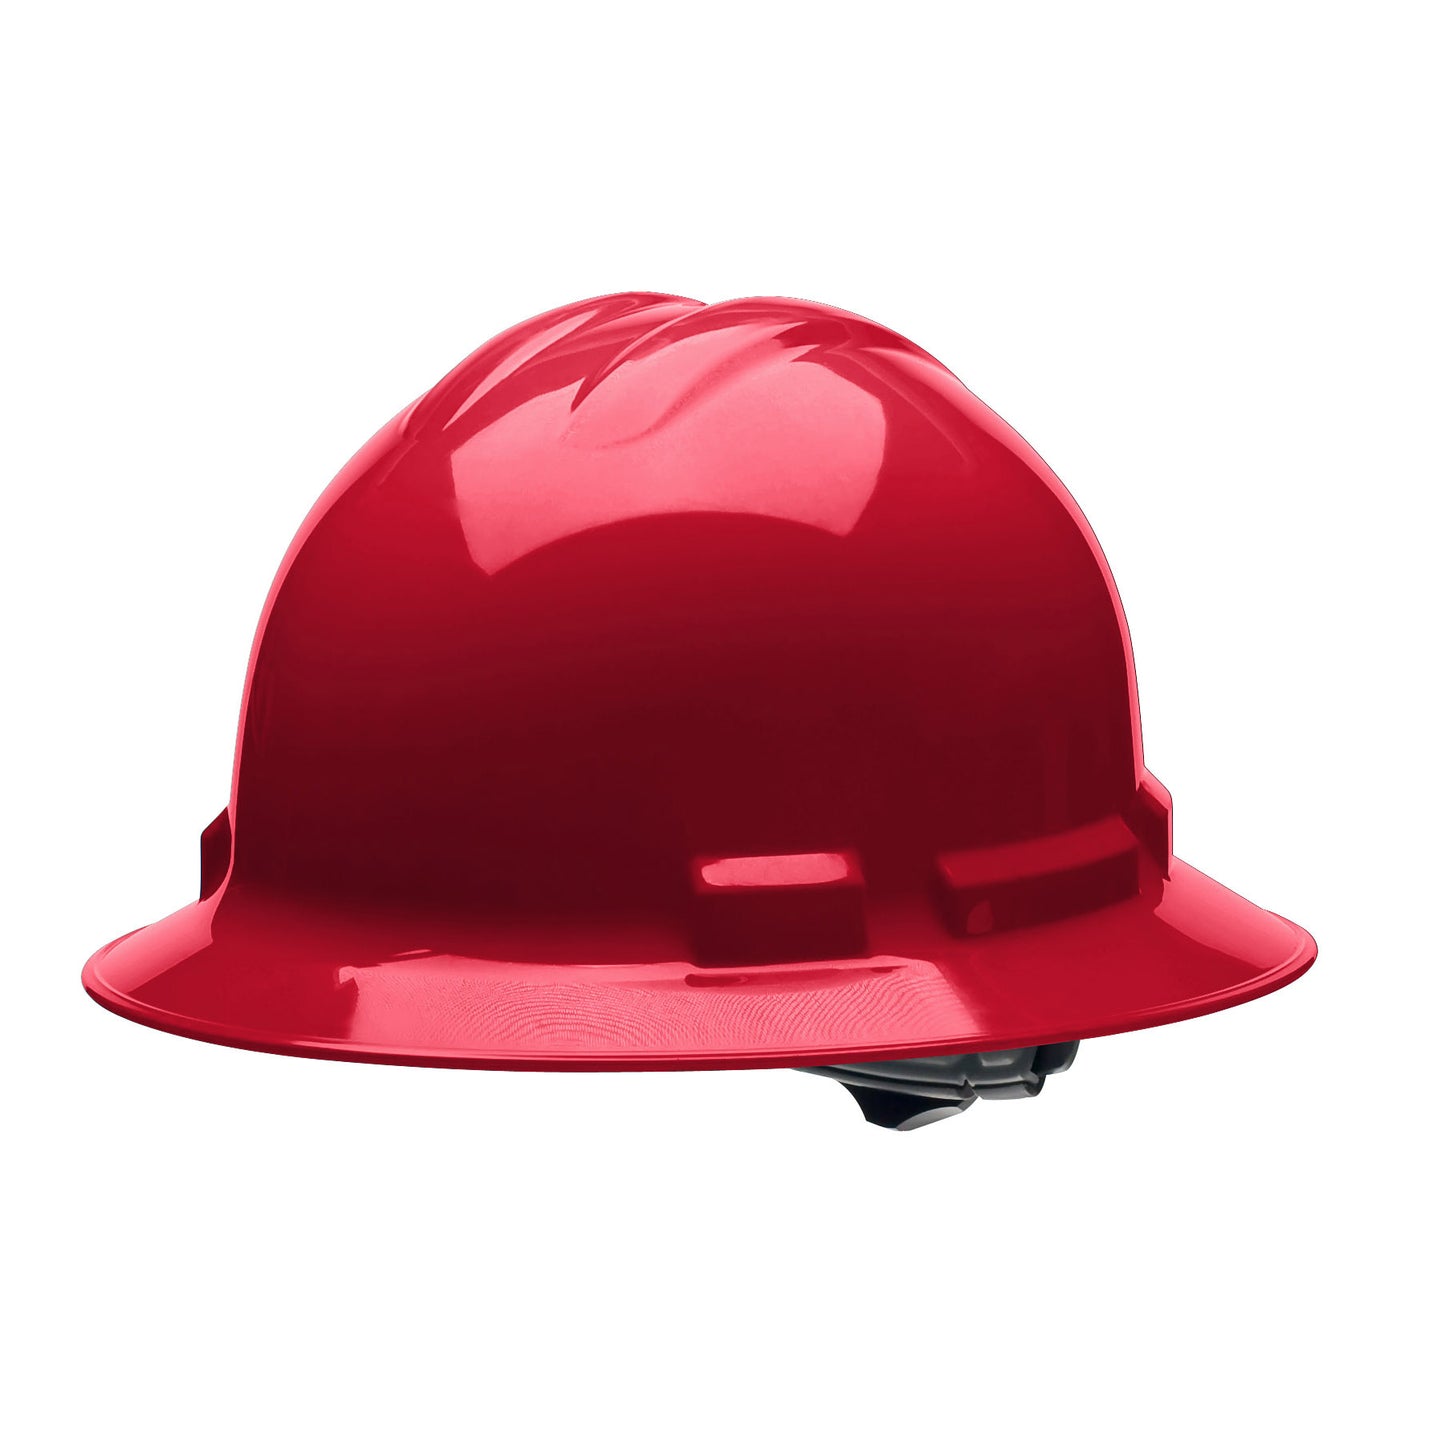 Full-Brim Style Hard Hat, 4-Point Ratchet Suspension, Class E and G, OSHA Approved Hard Hat